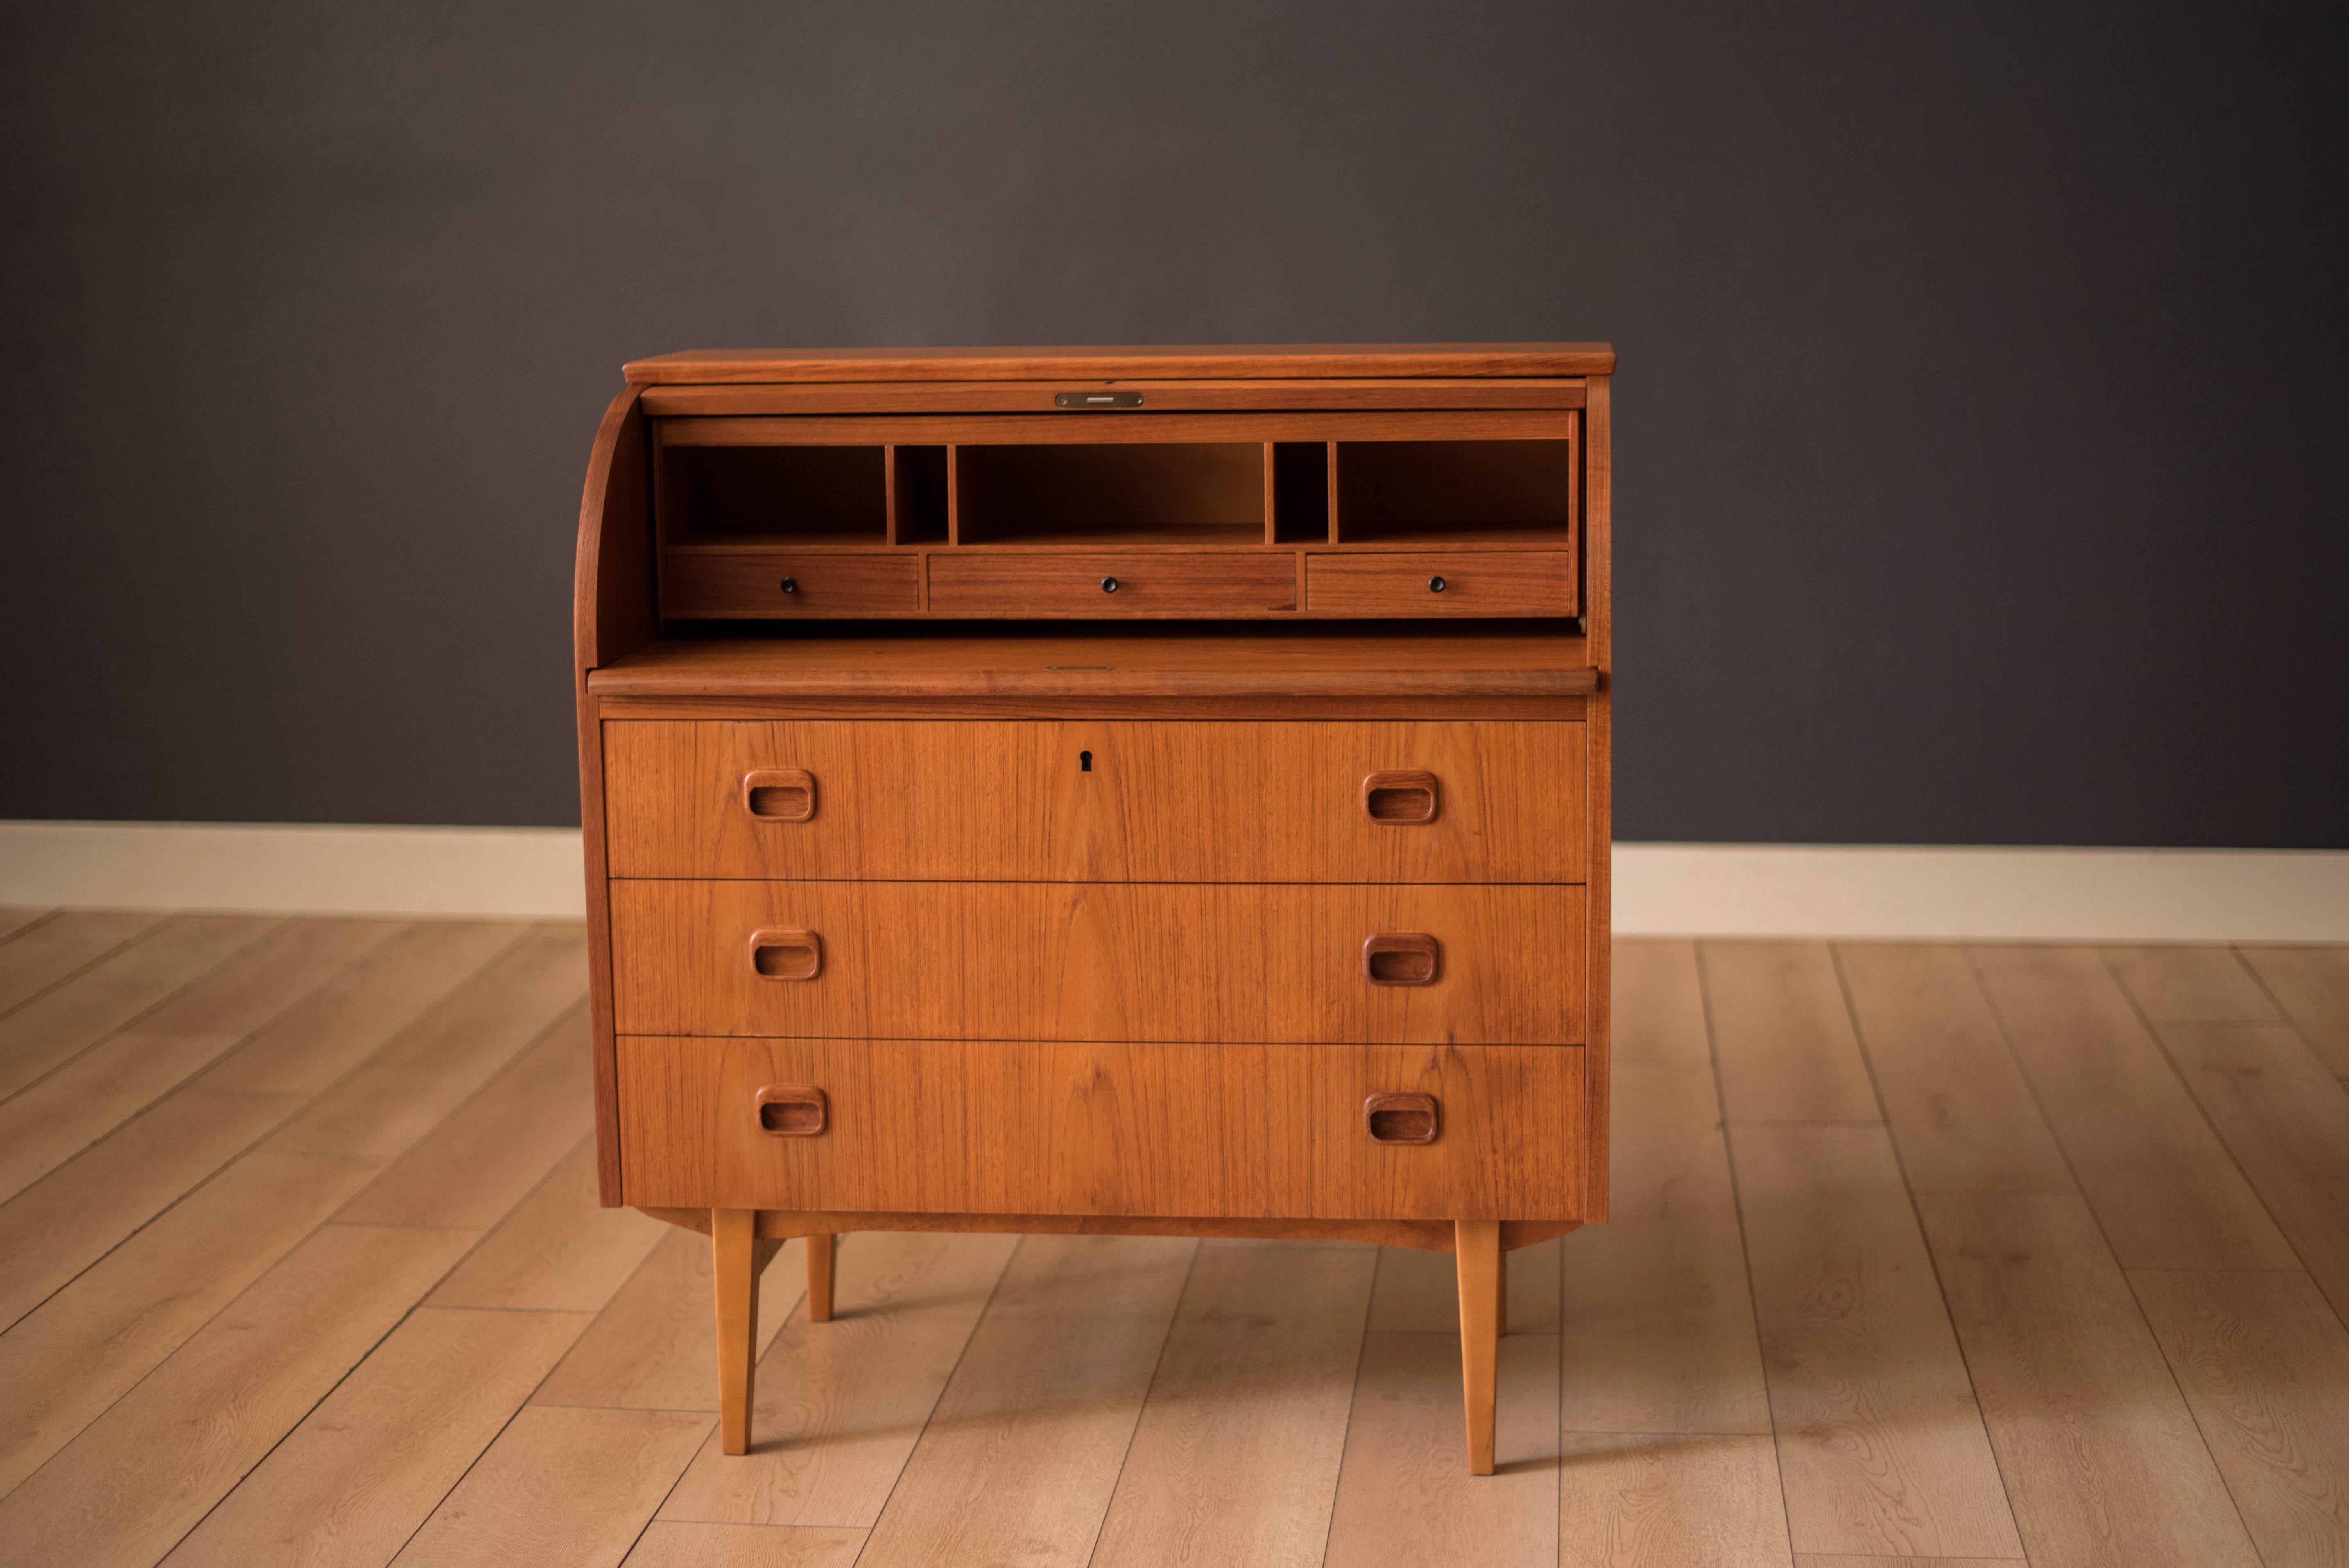 Mid Century Modern secretary desk in teak designed by Egon Ostergaard for Svensk Mobelindustri, Sweden. This piece is equipped with three deep storage drawers with sculpted handles. Features a stunning teak grain roll top door that reveals a slide